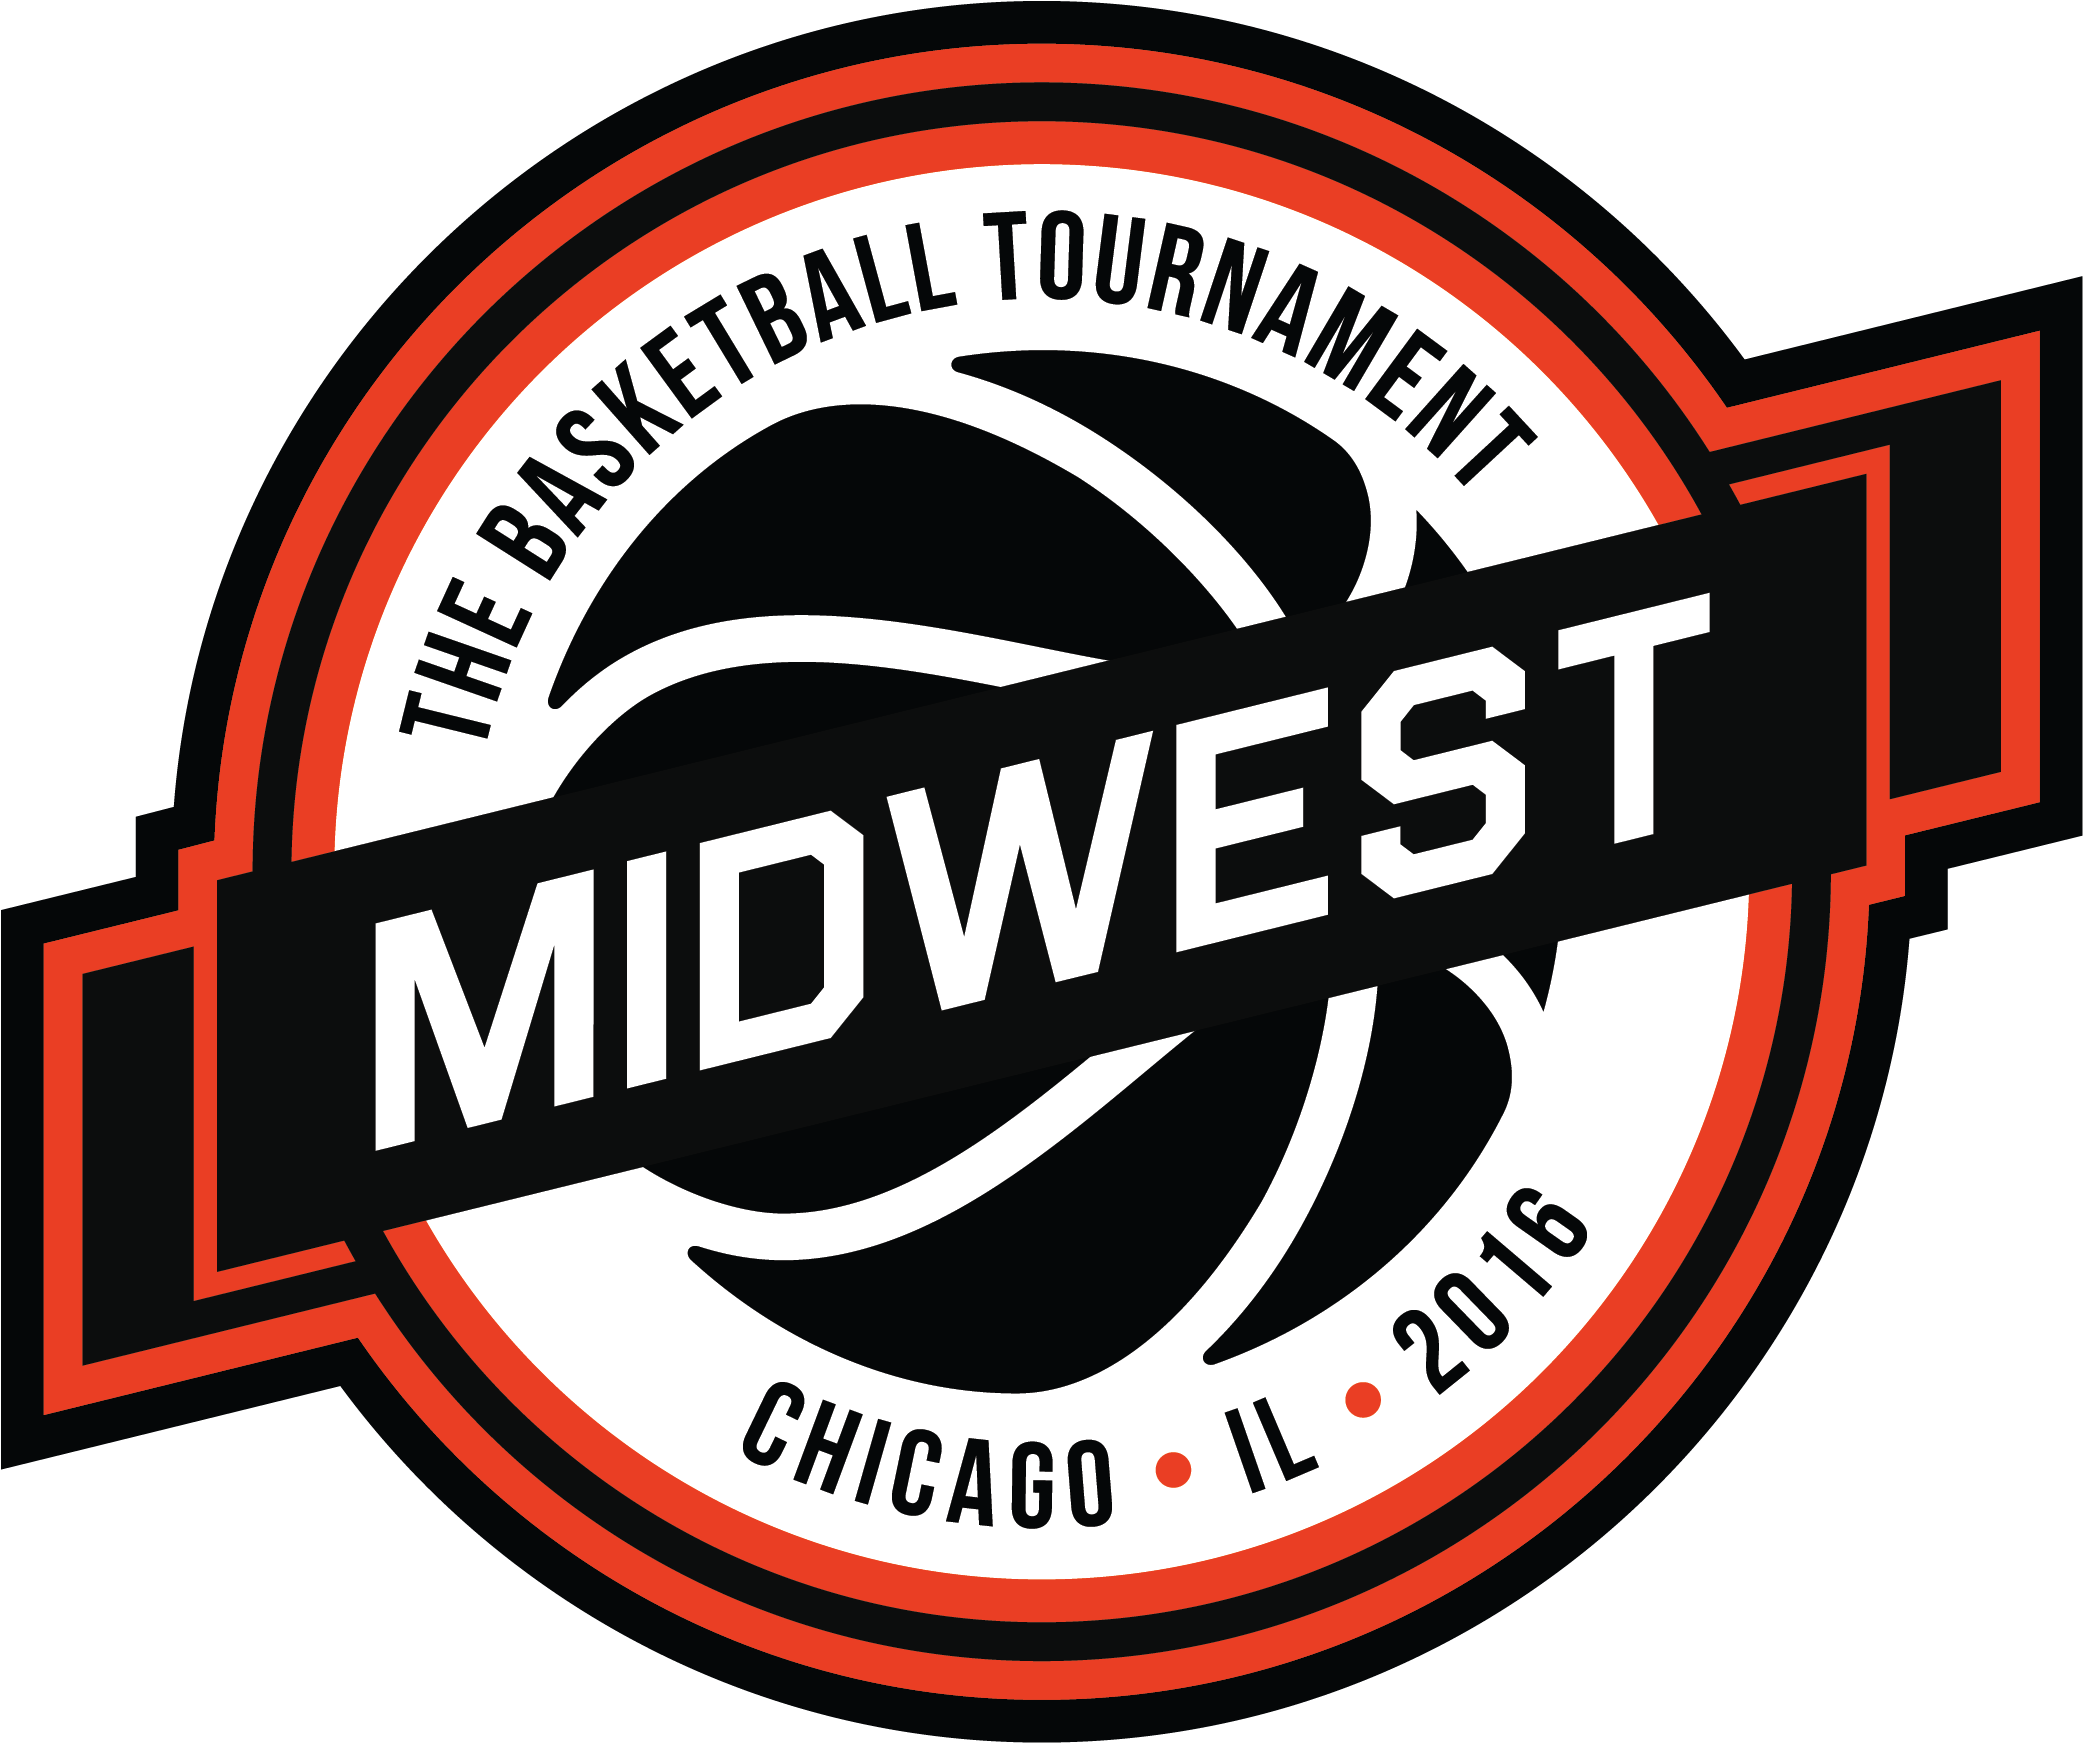 Midwest Team Uniforms Unveiled For Tbt - The Basketball Tournament (2182x1953)